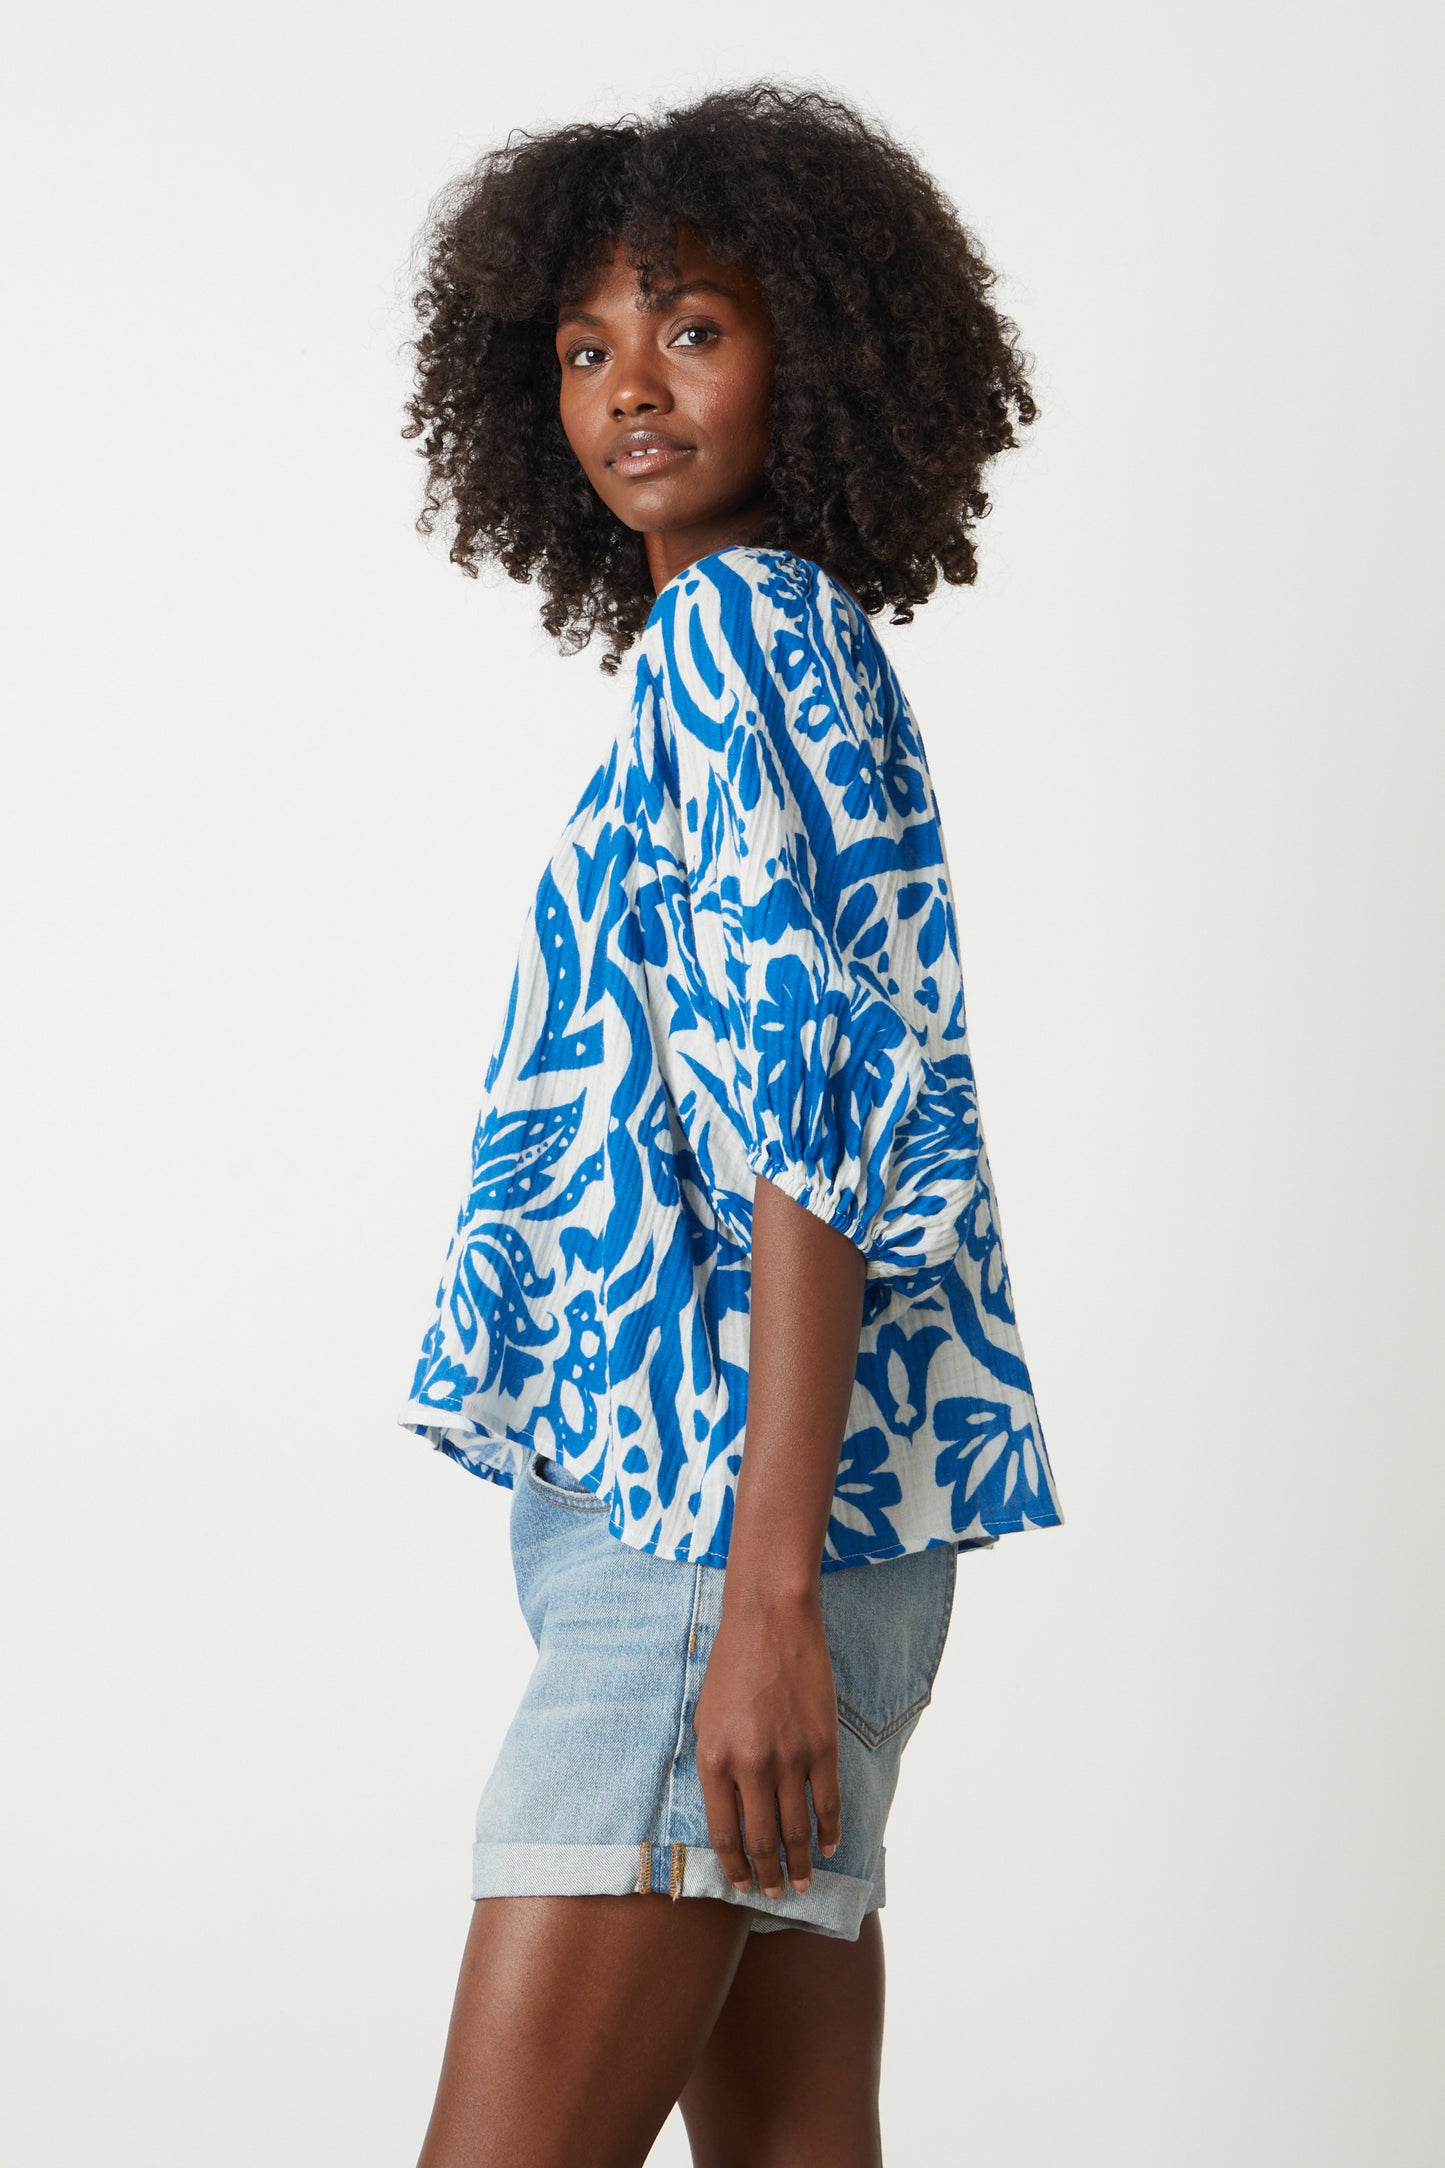 The model is wearing a Velvet by Graham & Spencer CANDICE PRINTED COTTON GAUZE TOP in blue and white floral.-26577386864833